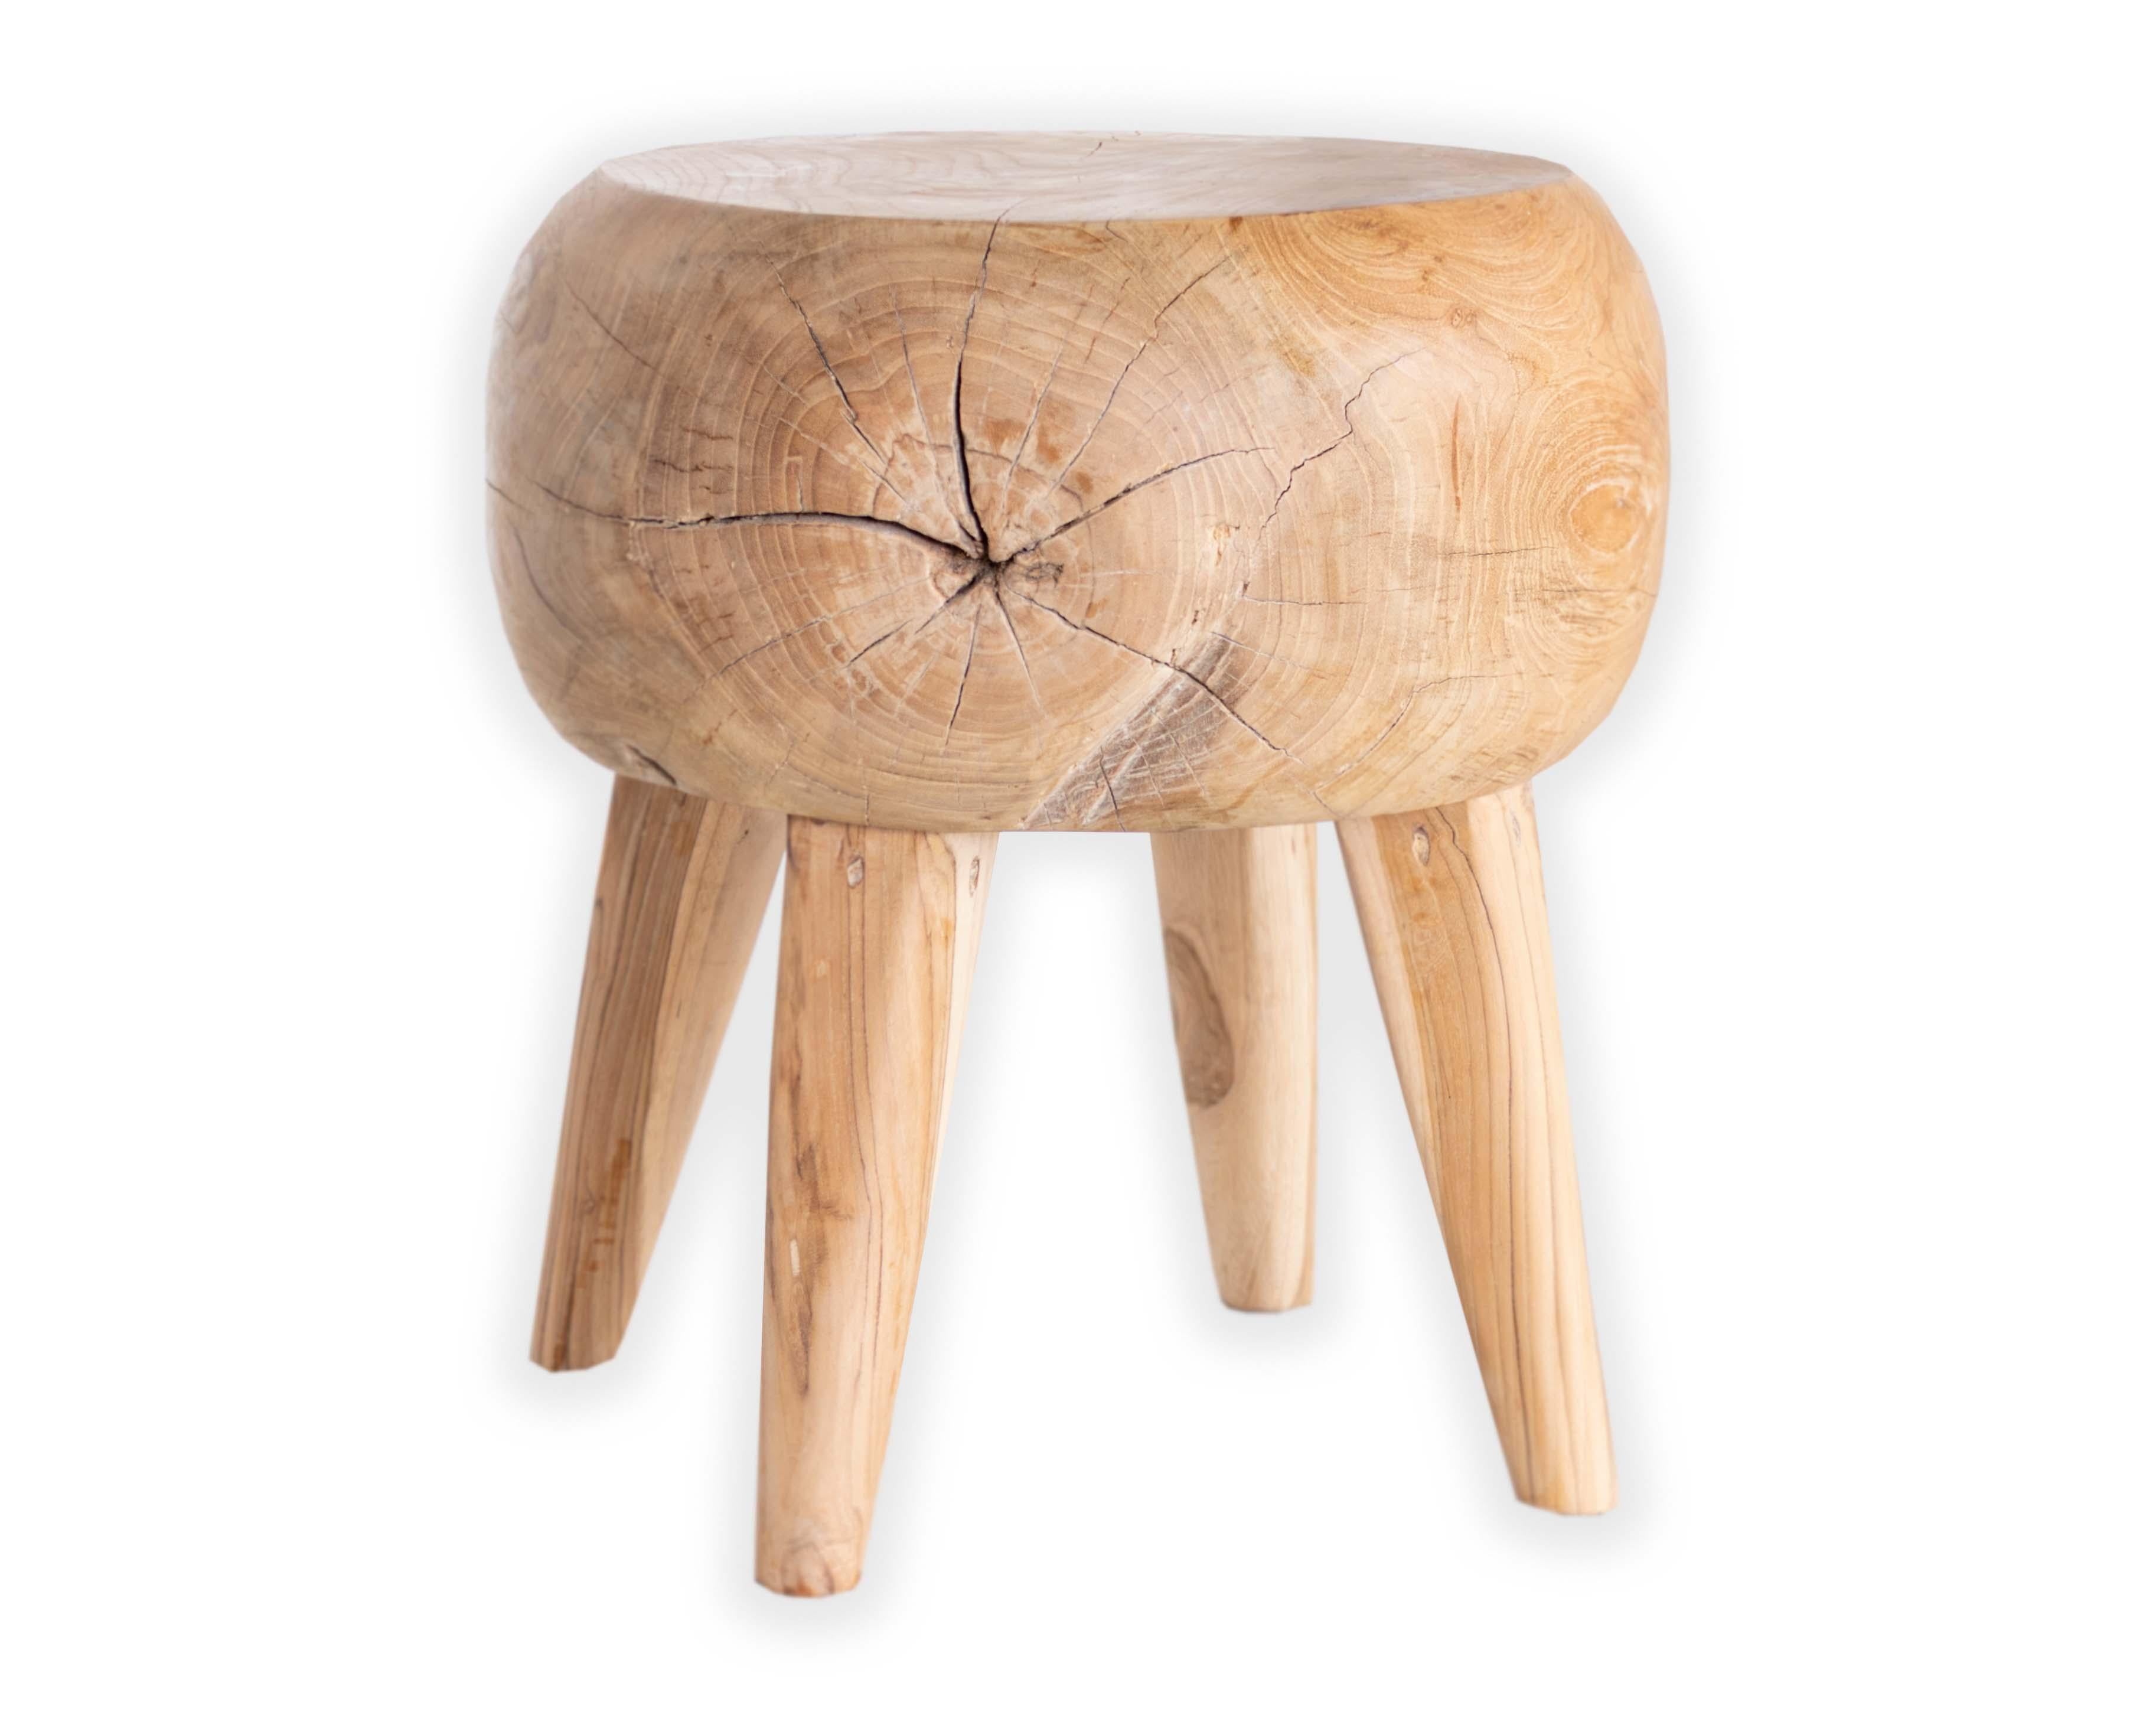 Rustic wooden end table/stool. 

This piece is a part of Brendan Bass’s one-of-a-kind collection, Le Monde. French for “The World”, the Le Monde collection is made up of rare and hard to find pieces curated by Brendan from estate sales, brocantes,